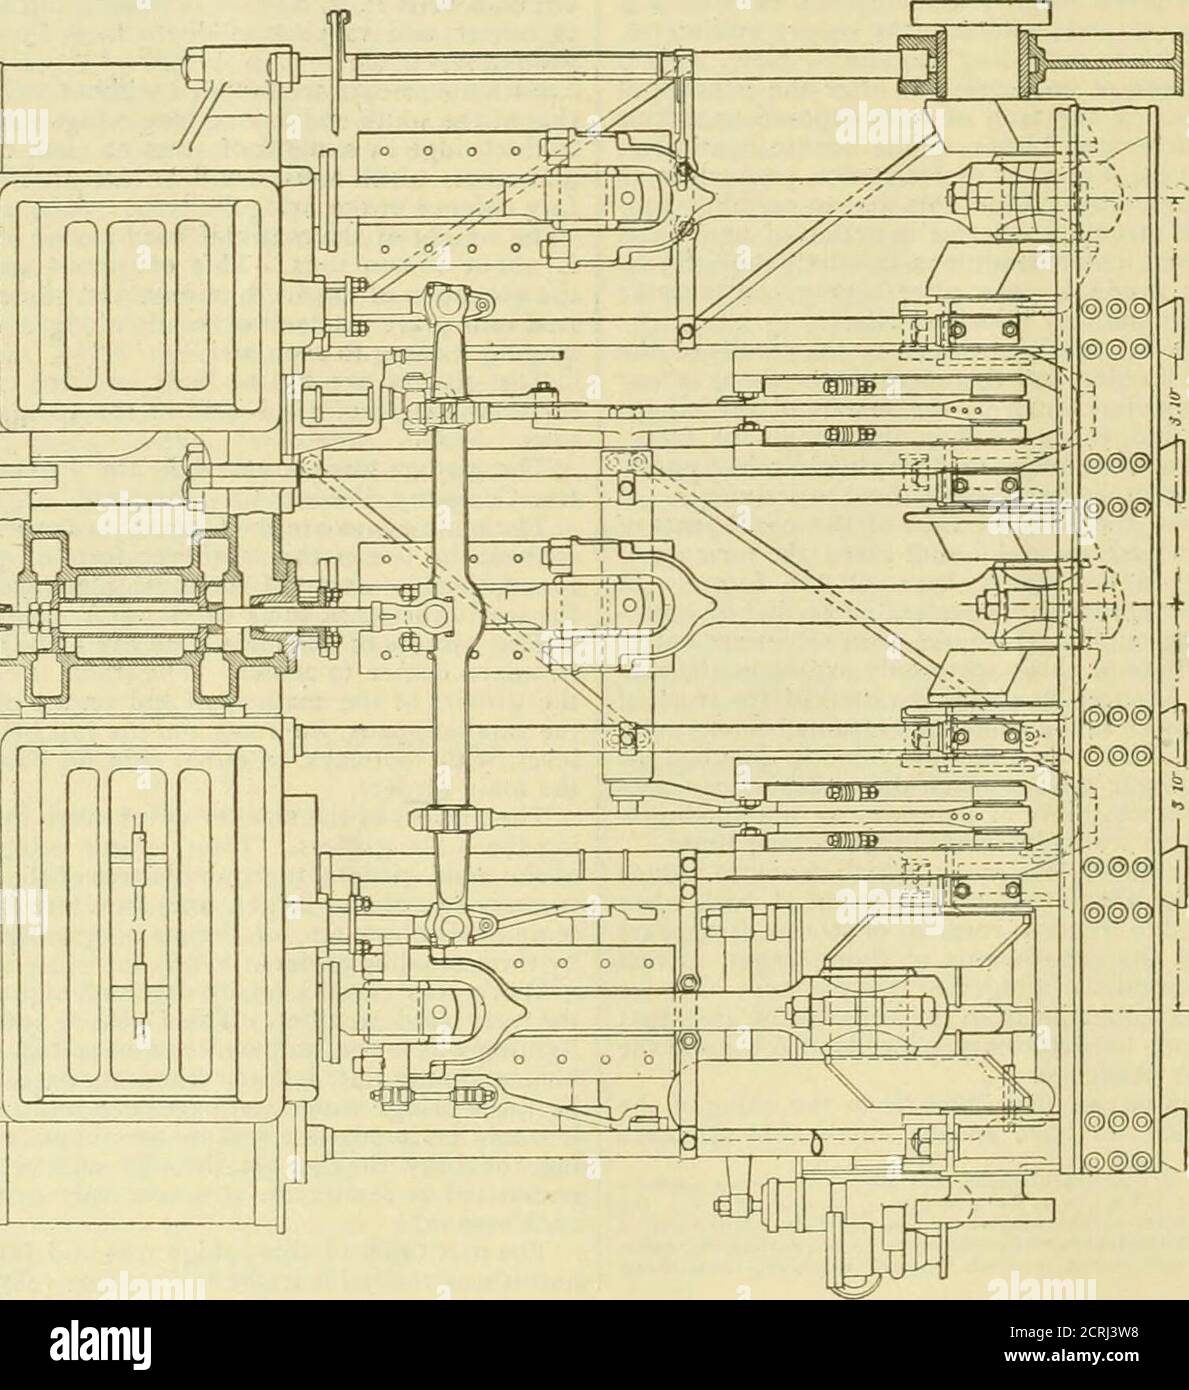 . The railroad and engineering journal . s s 5ZP=. &gt; z &lt; 2O 0 U u C-i D Q 5; O OJ. h;0 Vol. LXII, No. 3-] ENGINEERING JOURNAL. 127 Engines of a New Dutch Gunboat. The accompanying illustrations (from Industries) showthe engines and boilers of the new gunboat Ceram, re-cently built for the Dutch Colonial Navy by the ScheldeShipbuilding & Engineering Company at Flushing, Hol-land, Mr. W. H. Martin being the Engineer. The engines are of the triple-expansion surface-condens-ing type, the cylinders being 20 in., 2g in., and 46 in. indiameter, and the stroke 29 in. The high-pressure cyl-inder Stock Photo